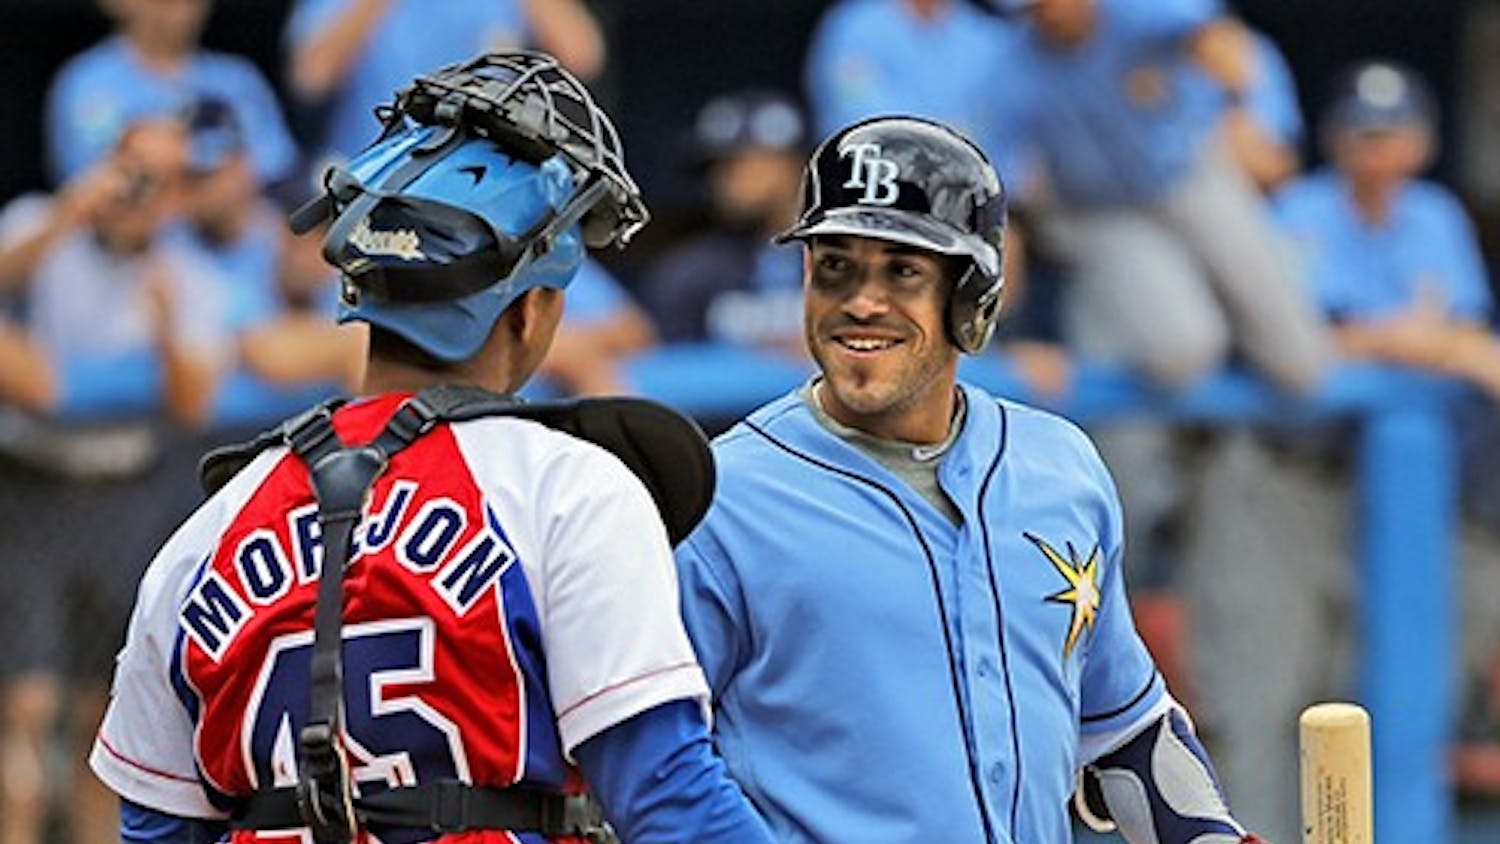 Cuban-Born Tampa Bay Rays Outfielder Dayron Varona is greeted by Cuban catcher Frank Camilo Morejon Reyes during game at the Estadio Latinoamericano between the Tampa Bay Rays and the Cuban National team on March 22, 2016 in Havana, Cuba. (Al Diaz/Miami Herald/TNS) 